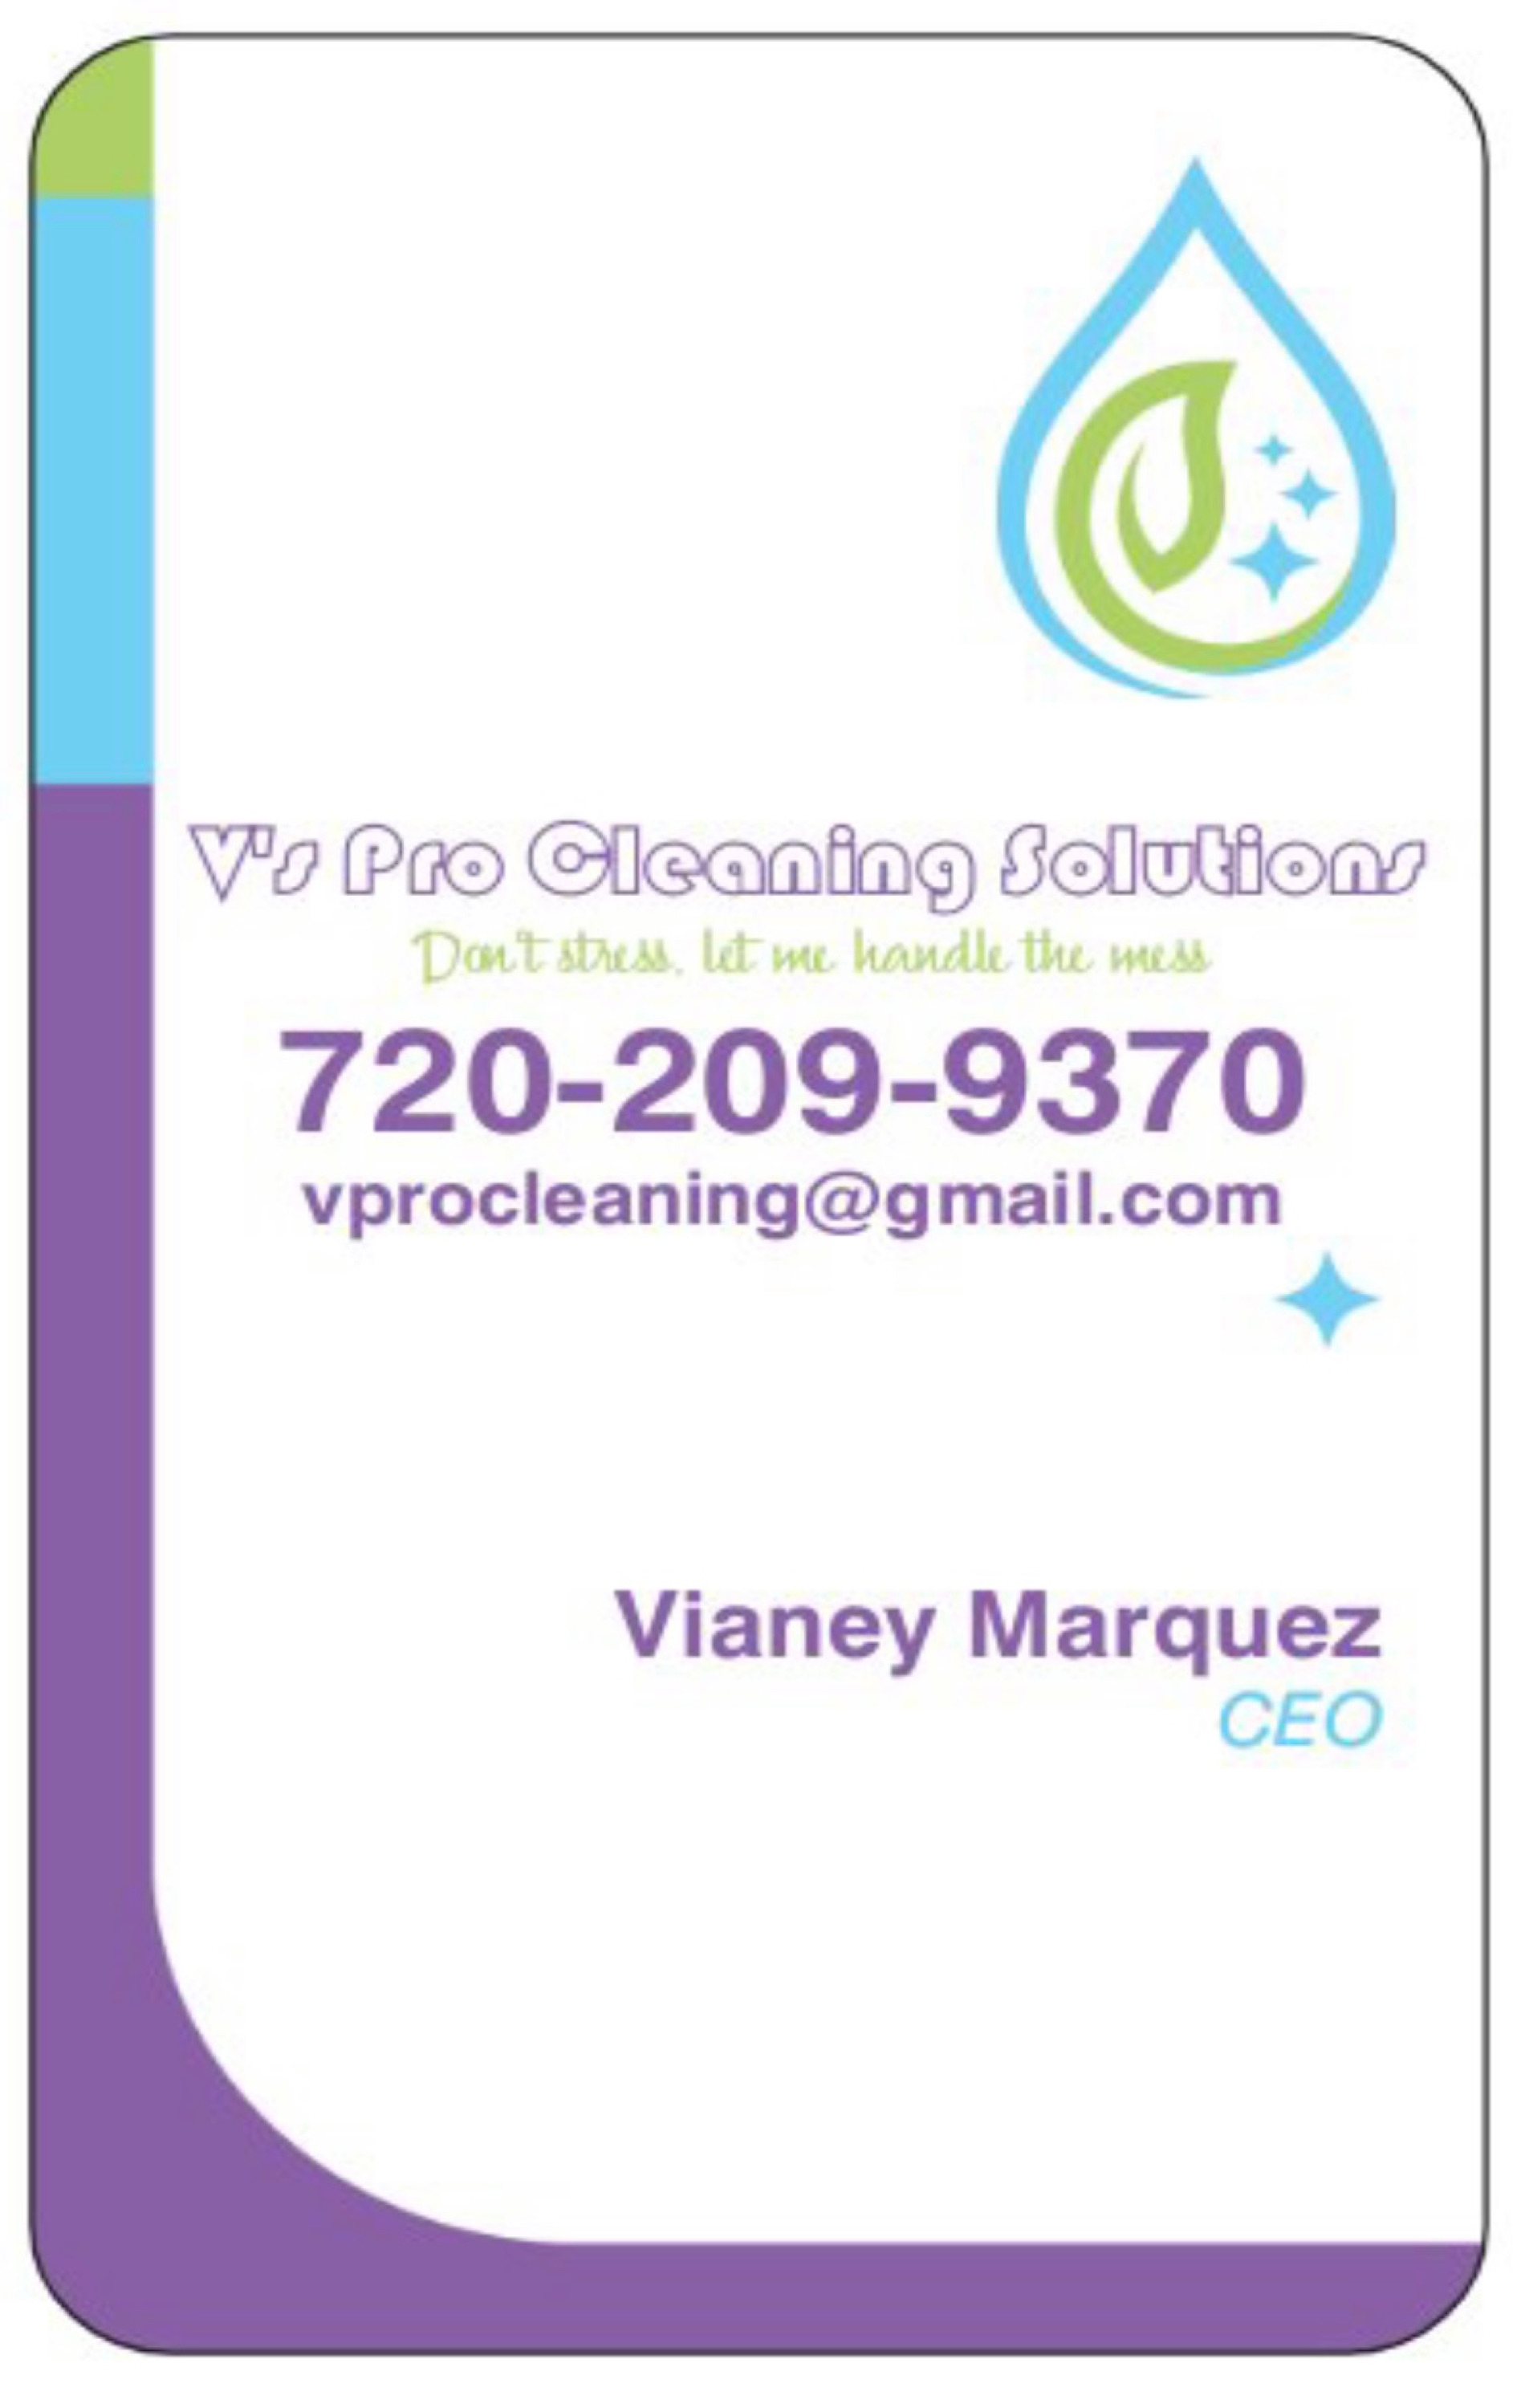 V's Pro Cleaning Solutions Logo